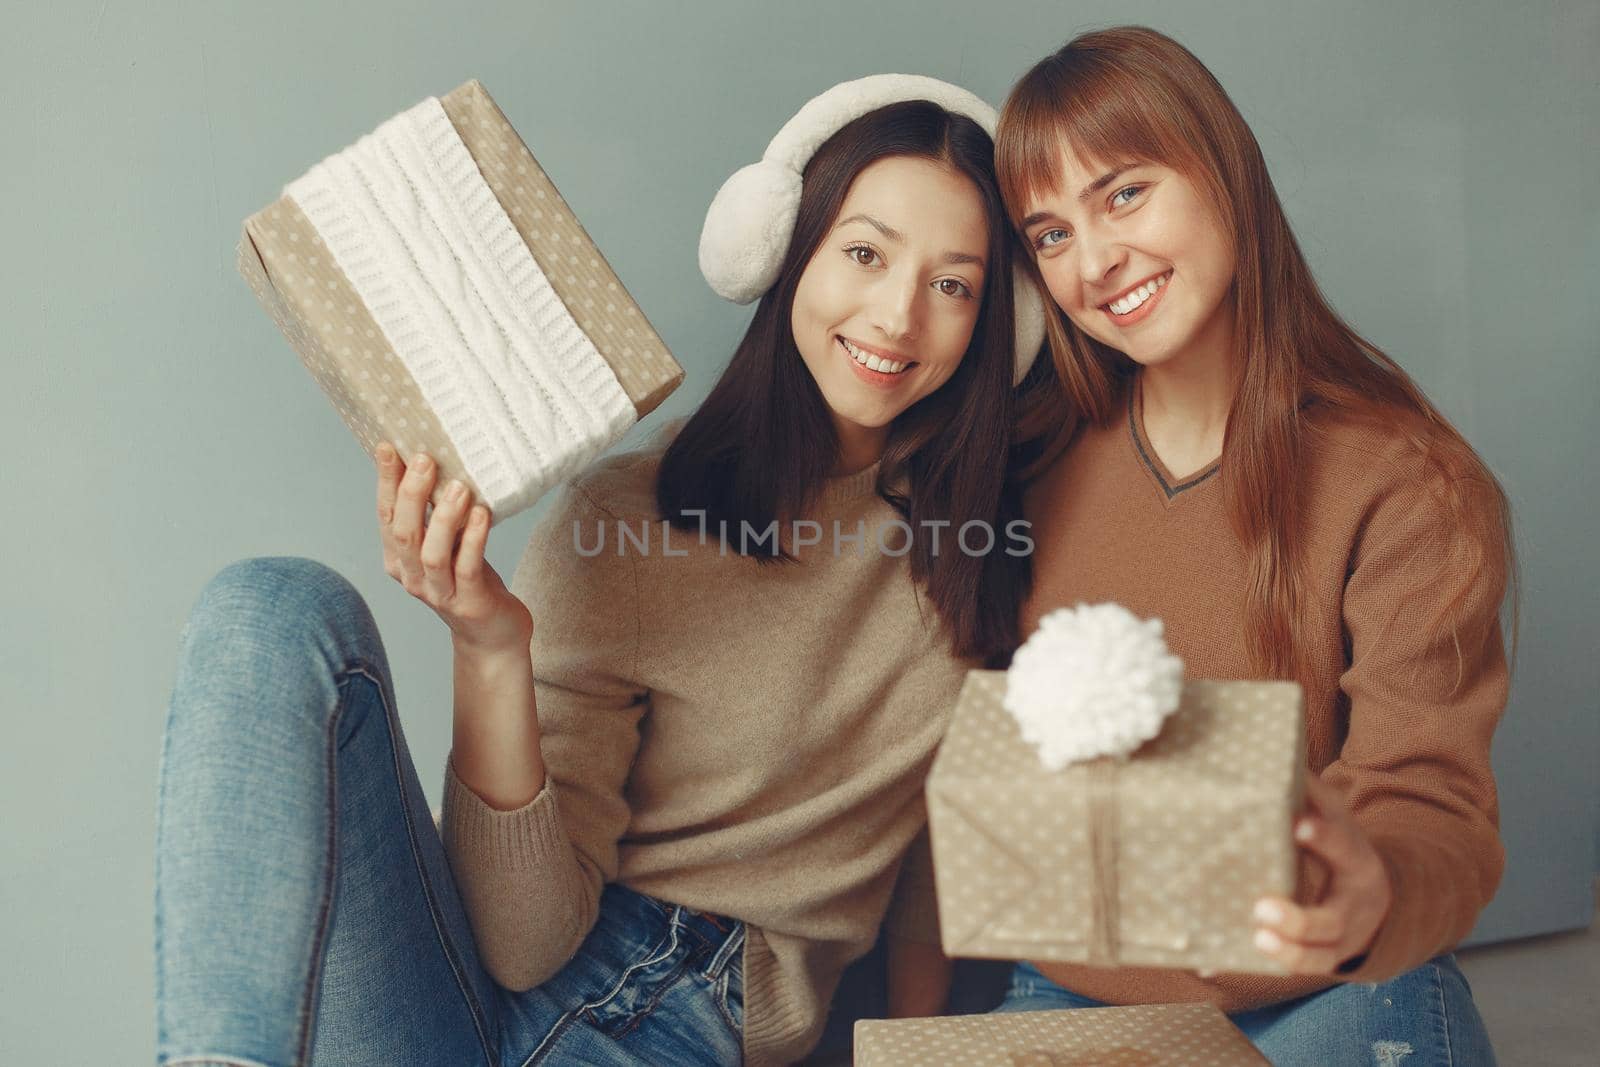 Women with presents. Girls in a brown sweater. Ladies in a studio.